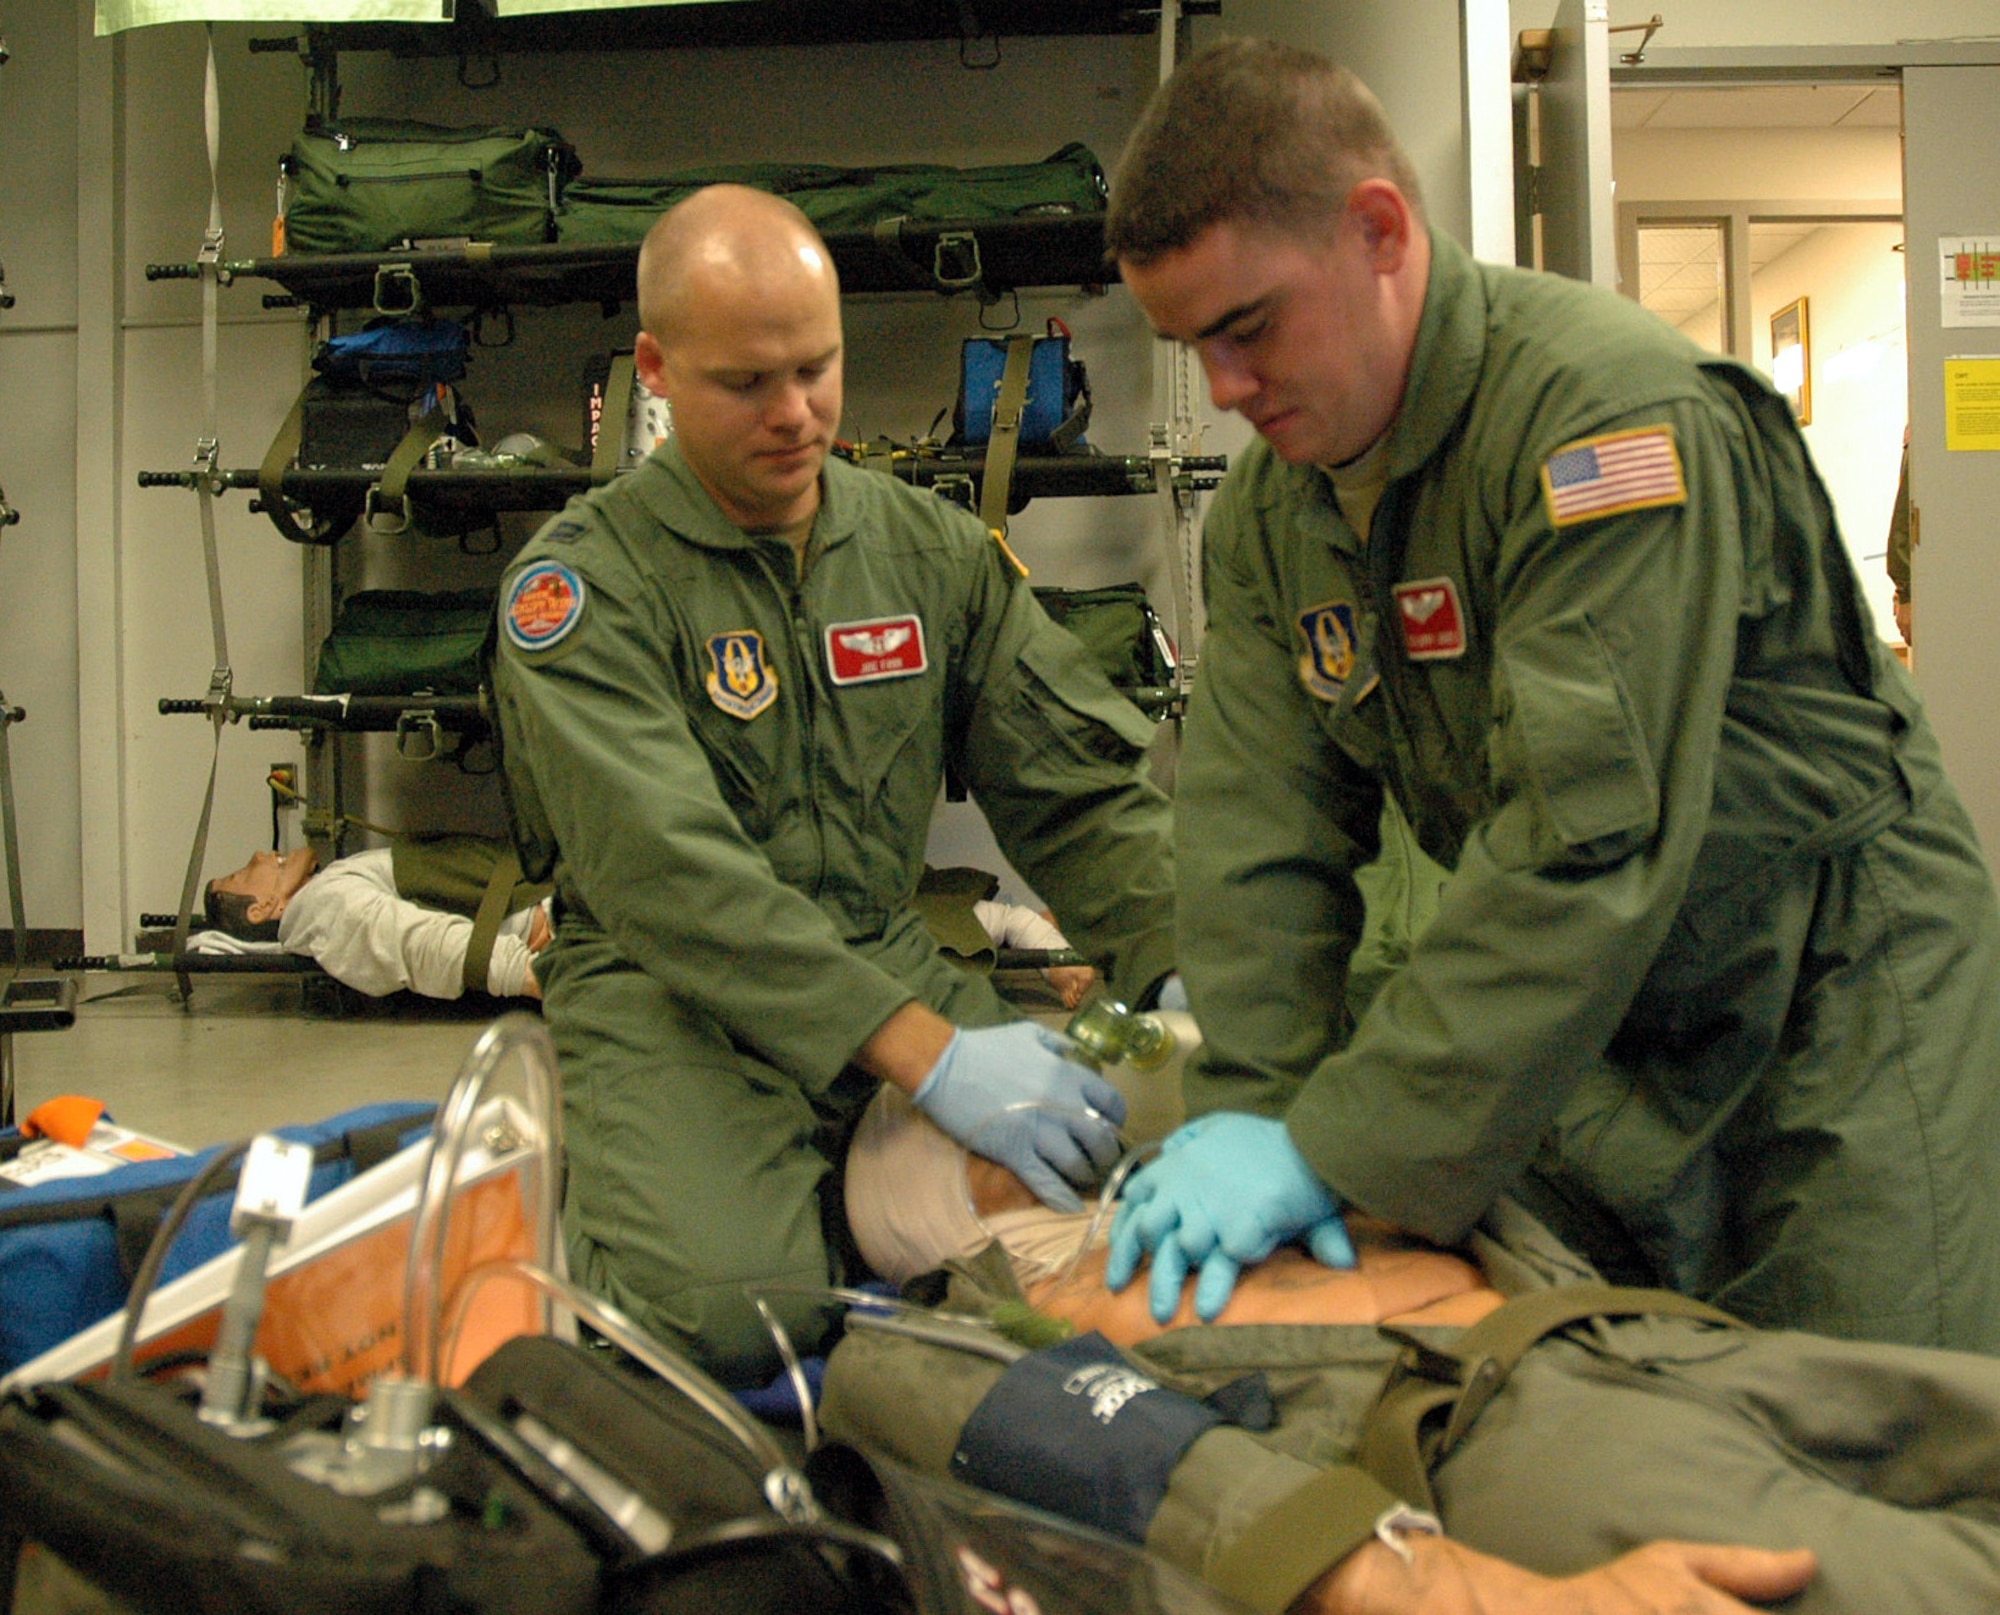 Capt. Joseph Foss, left, and Tech. Sgt. Larry Jones, both with the 446th Aeromedical Evacuation Squadron at McChord Air Force Base, Wash., practice cardiopulmonary resuscitation with bag-valve mask ventilations as part of in-flight patient care in preparation for the C-130 Hercules simulated contingency mission event in Rodeo 2009. Captain Foss and Sergeant Jones will be among more than 2,500 participants and 100 teams in the bi-annual Air Mobility Command Rodeo competition at McChord July 19-24. (U.S. Air Force photo/Tech. Sgt. Jake Chappelle)